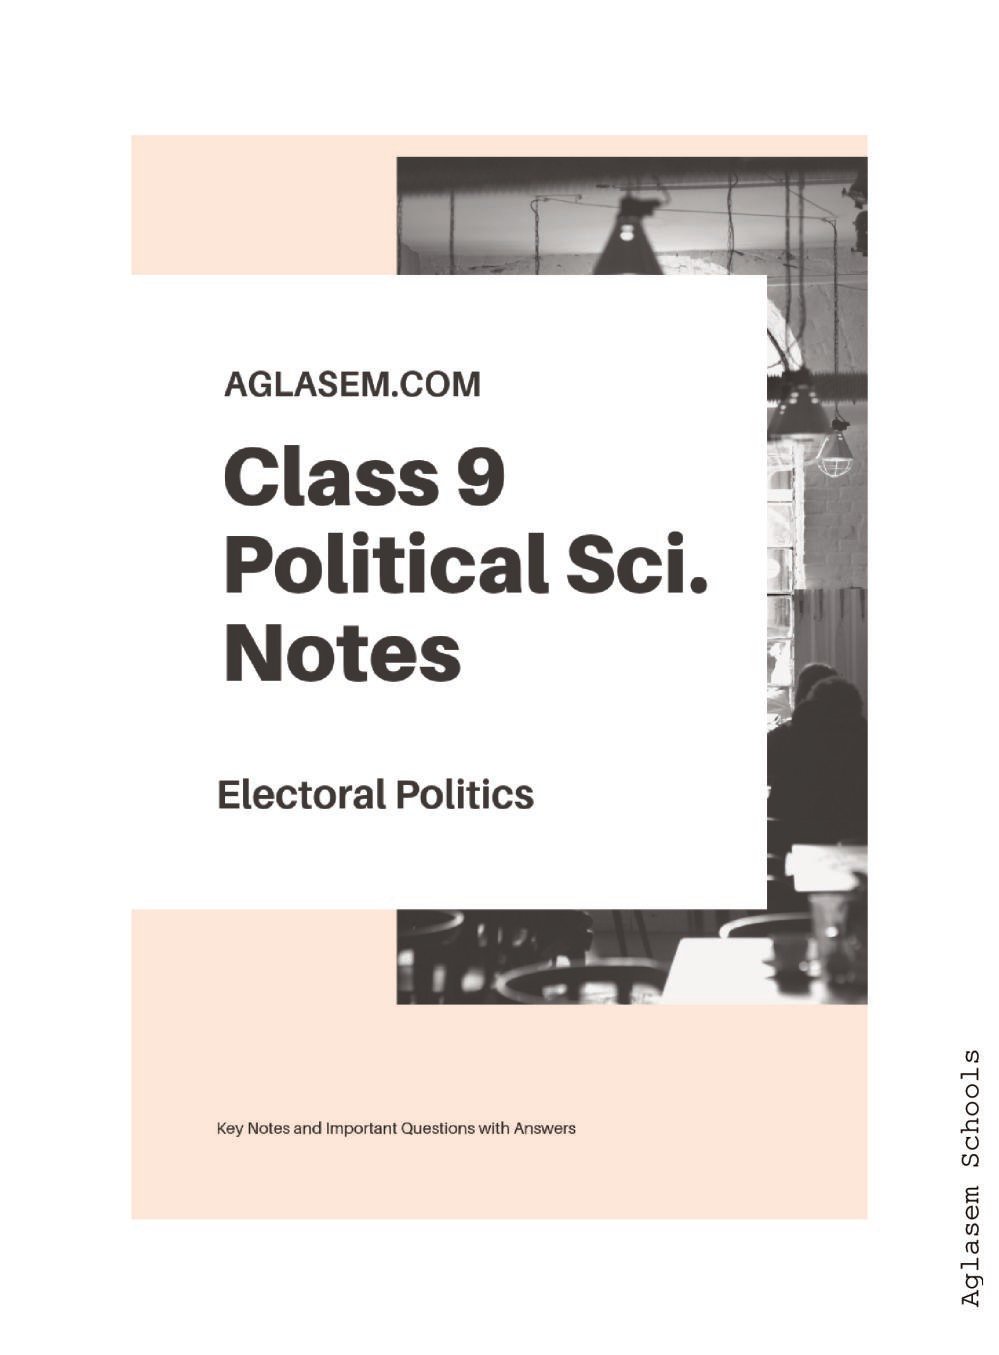 Class 9 Social Science Political Science / Civics Notes for Electoral Politics - Page 1